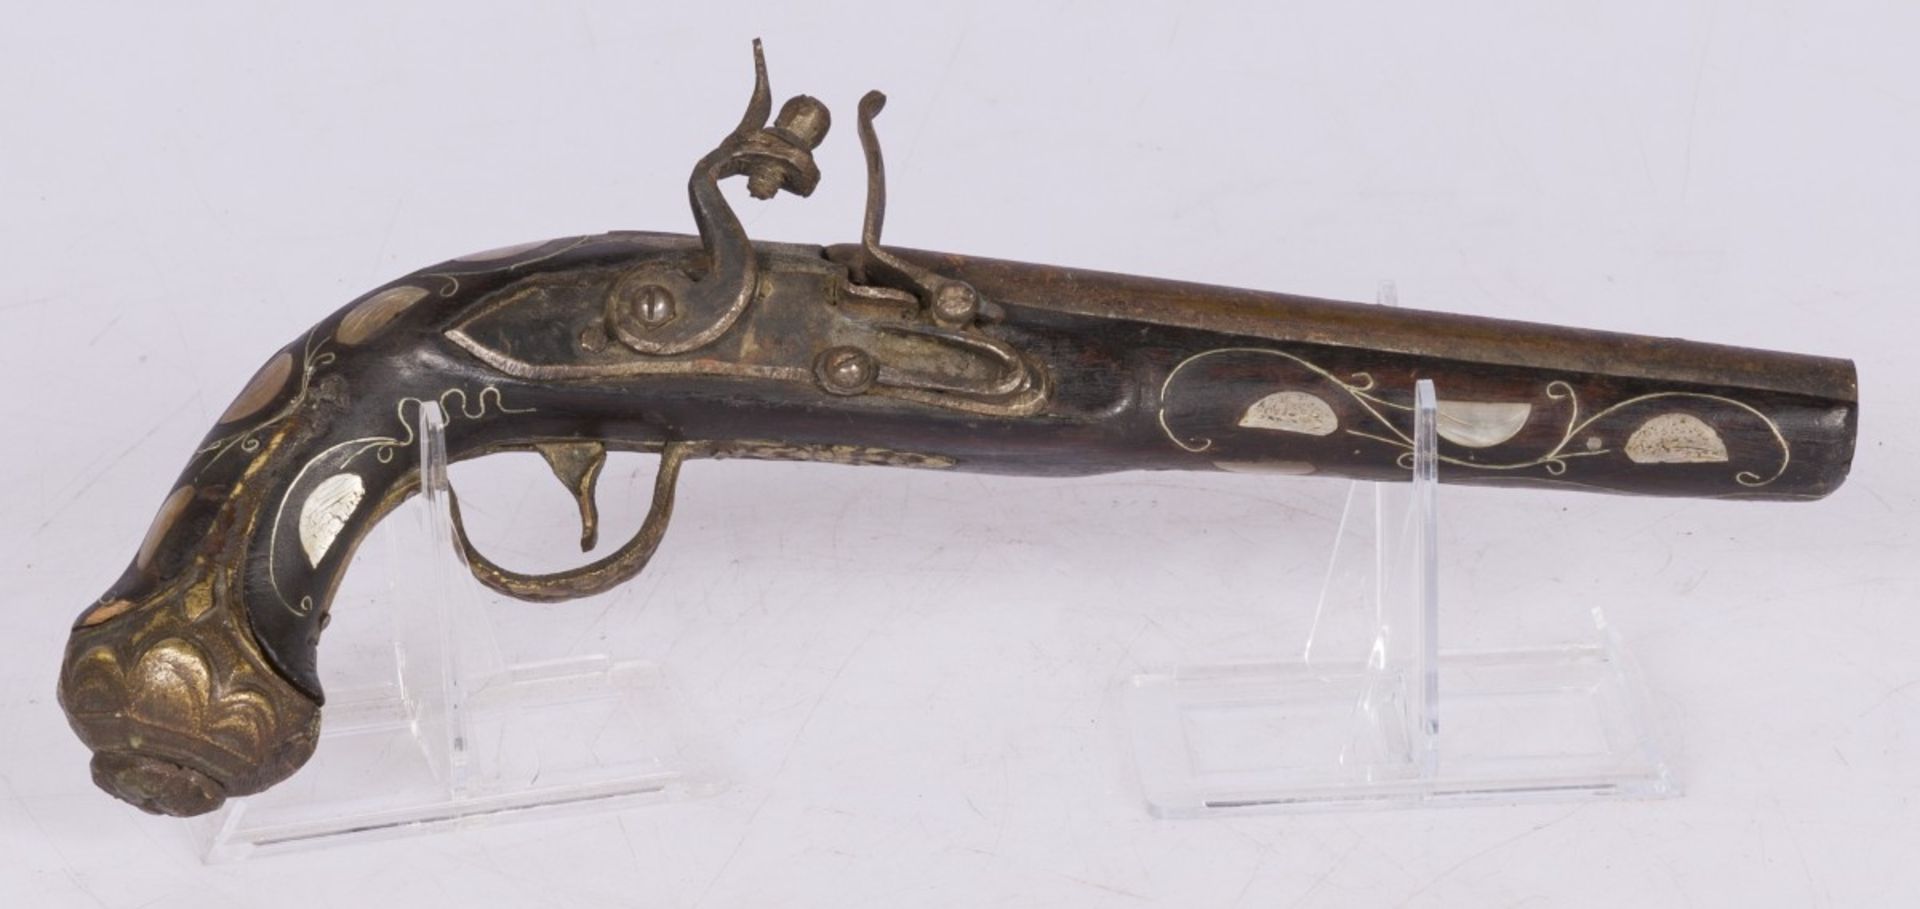 A British equestrian flintlock pistol for the Ottoman Empire, late 19th/ early 20th century.